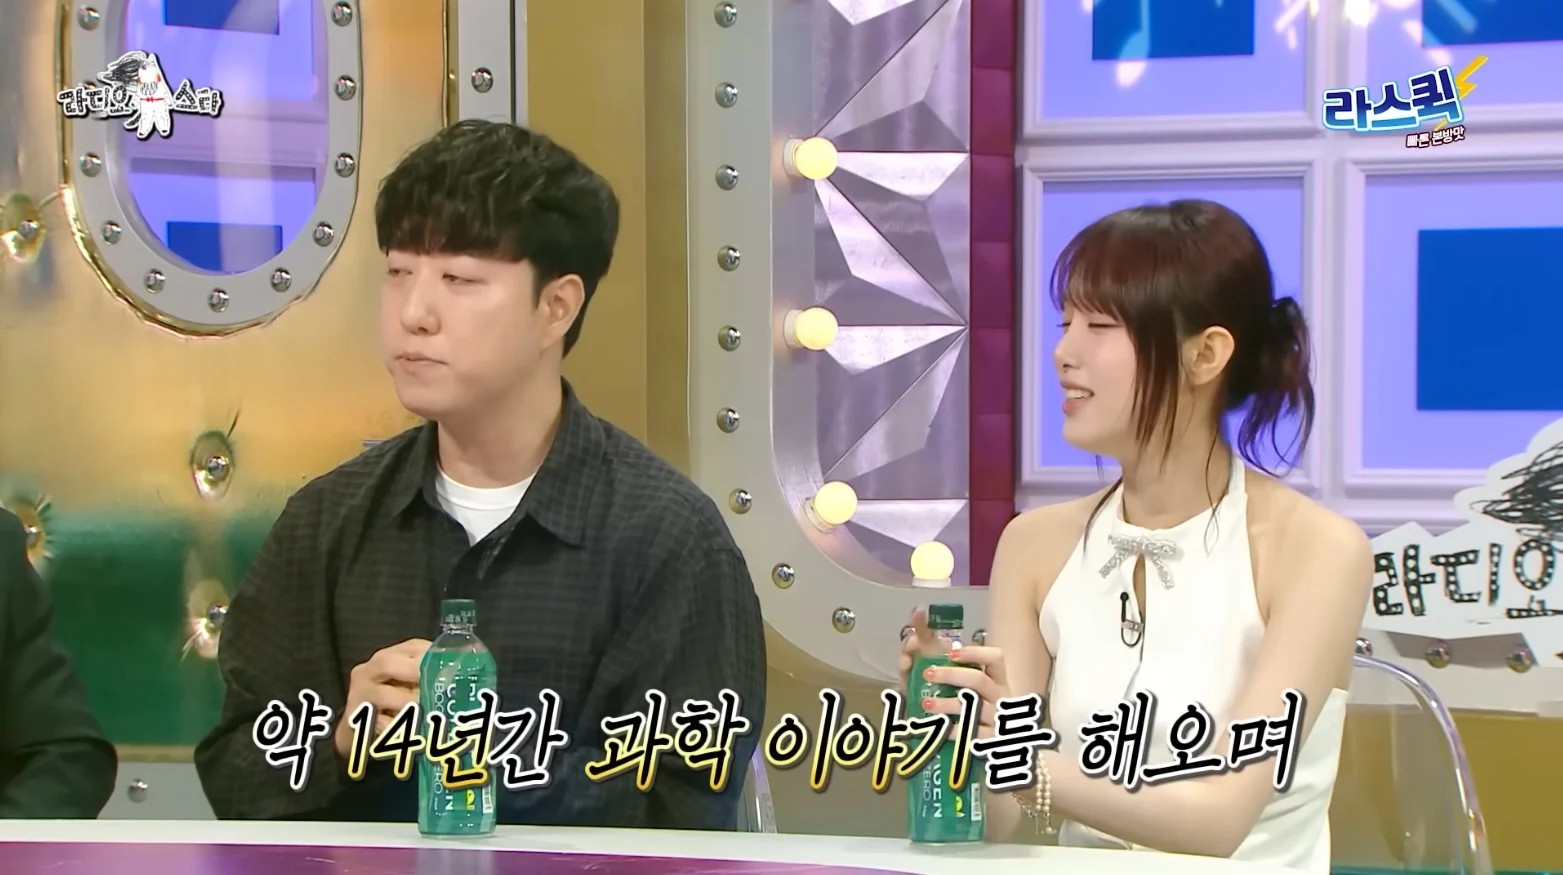 A YouTuber's orbital talk that appeared on Radio Star with as many as 5 people